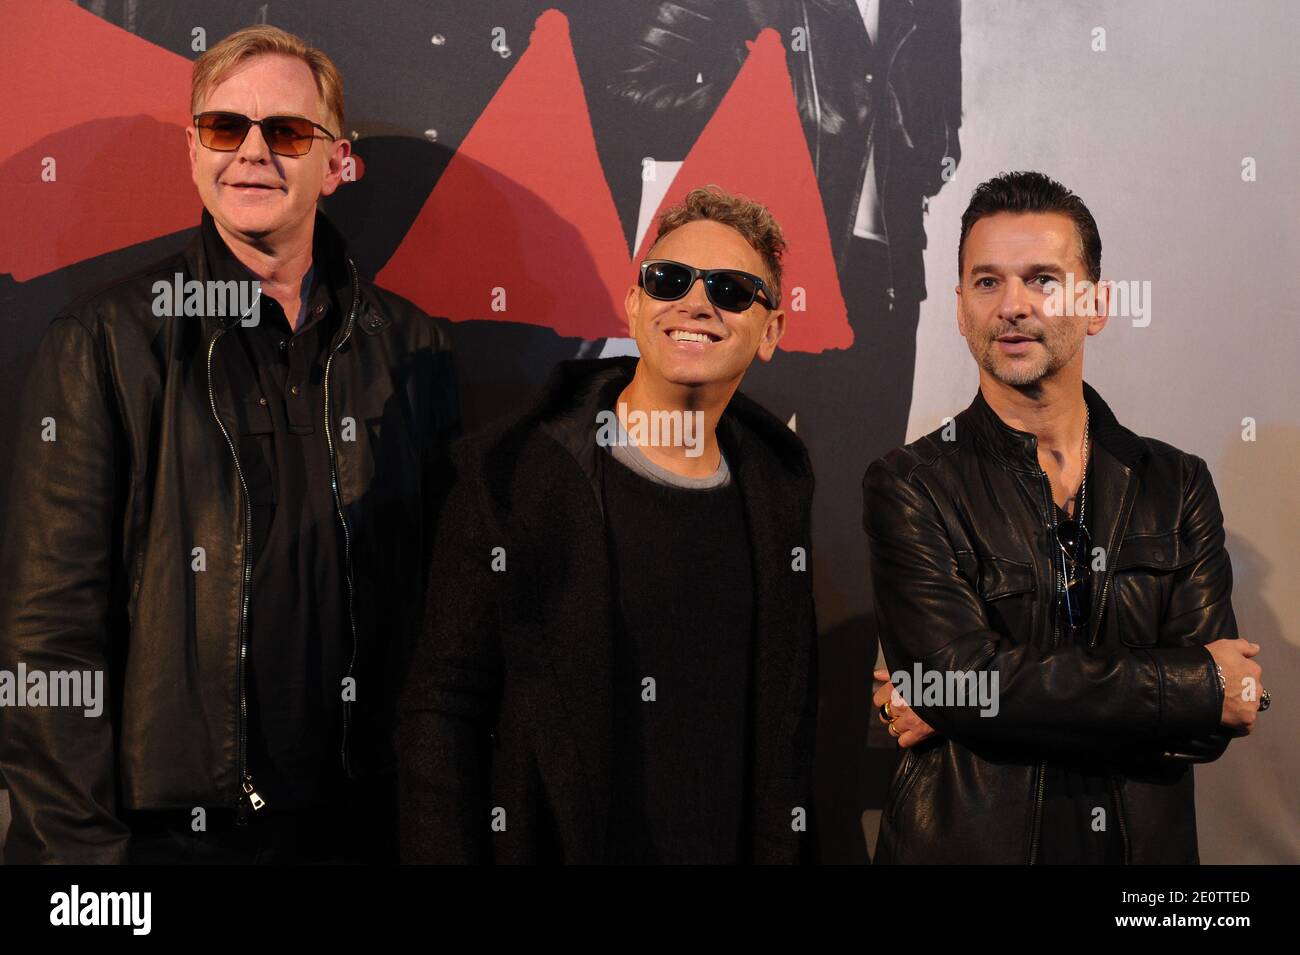 British Band Depeche Mode (Dave Gahan, Martin Gore and Andy Fletcher) poses  before a press conference to announce their 2013 World Tour, in Paris,  France, on October 23, 2012. Photo by Christophe